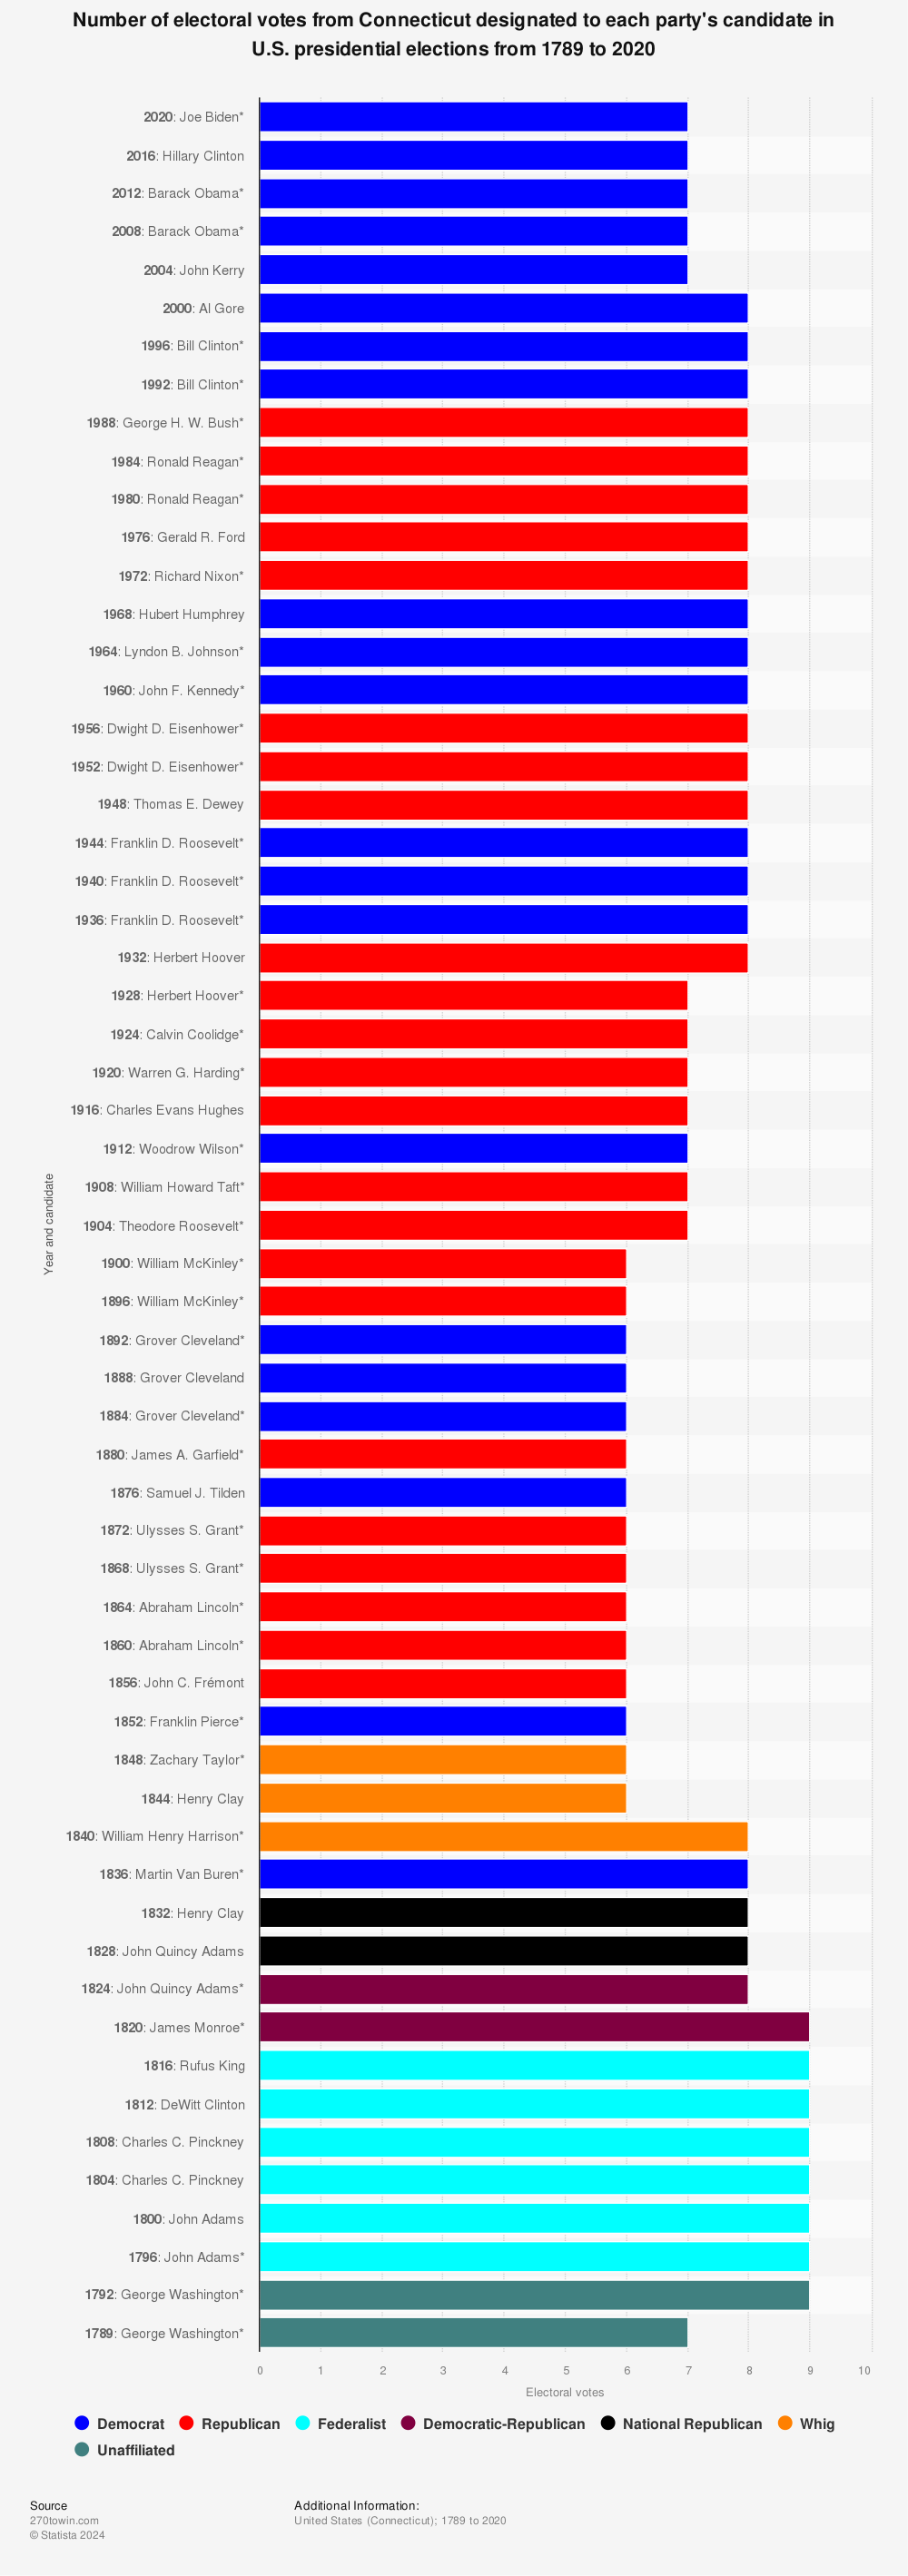 Statistic: Number of electoral votes from Connecticut designated to each party's candidate in U.S. presidential elections from 1789 to 2020 | Statista